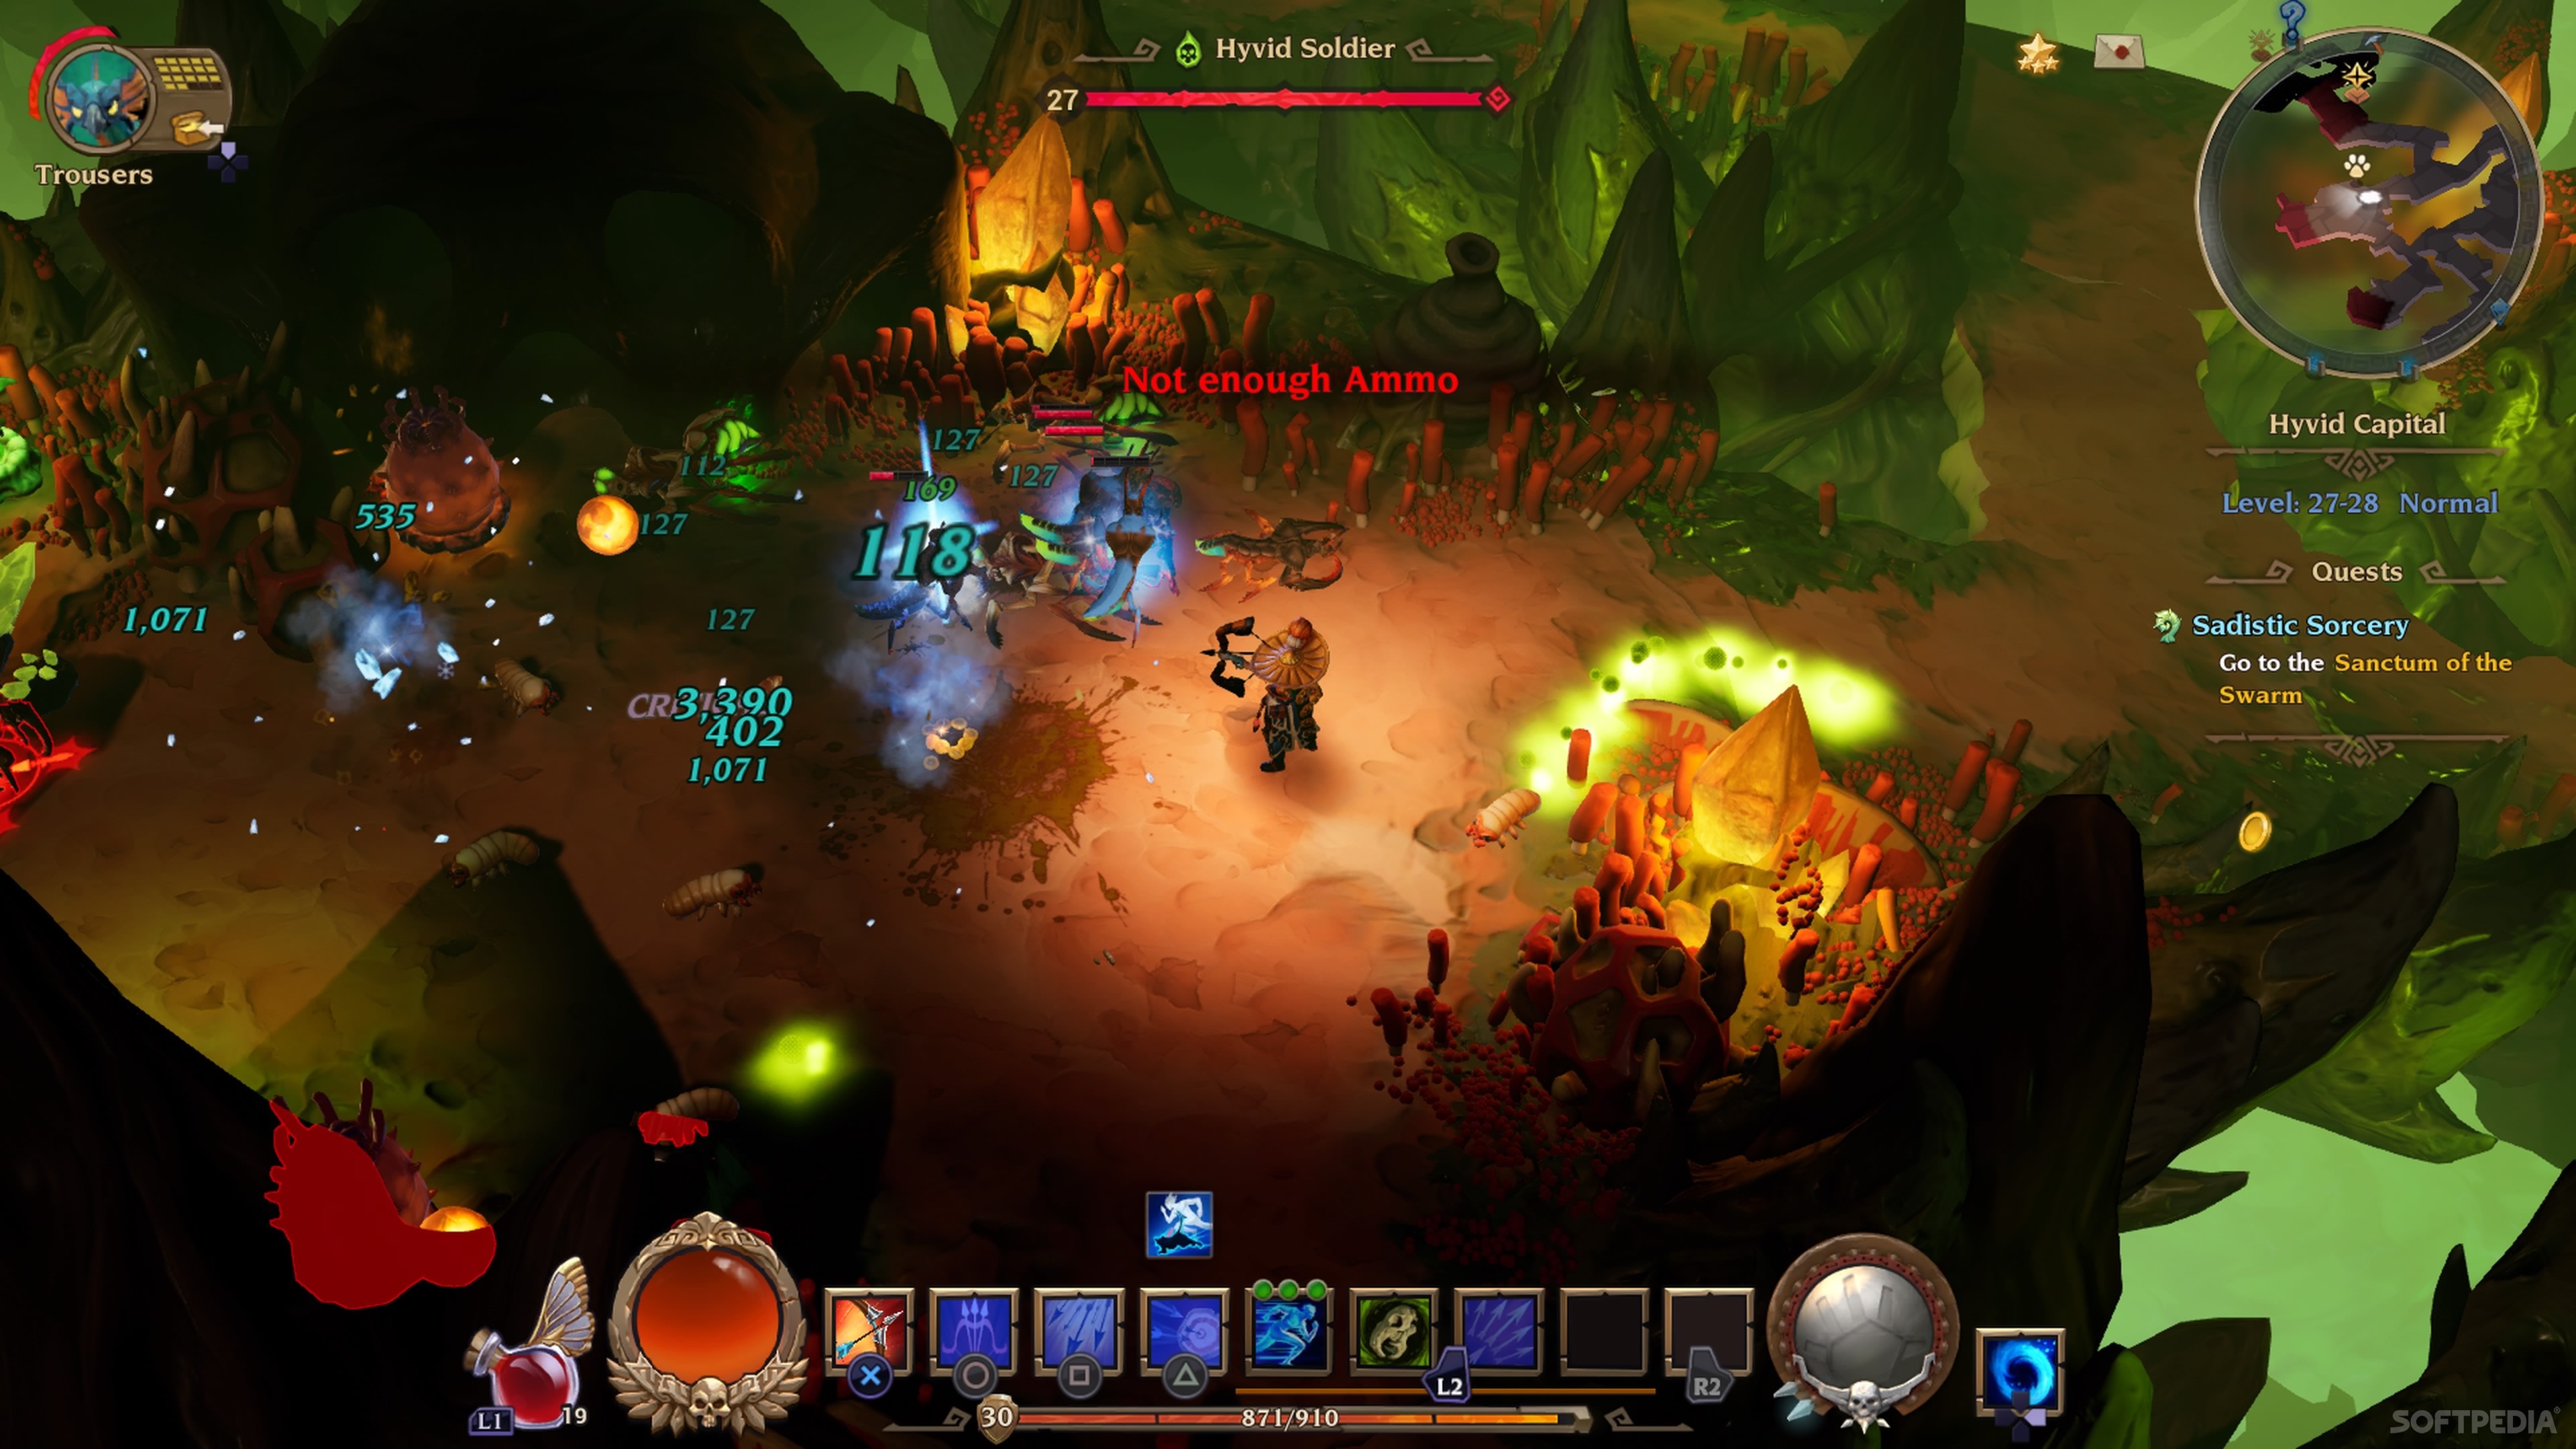 torchlight iii review